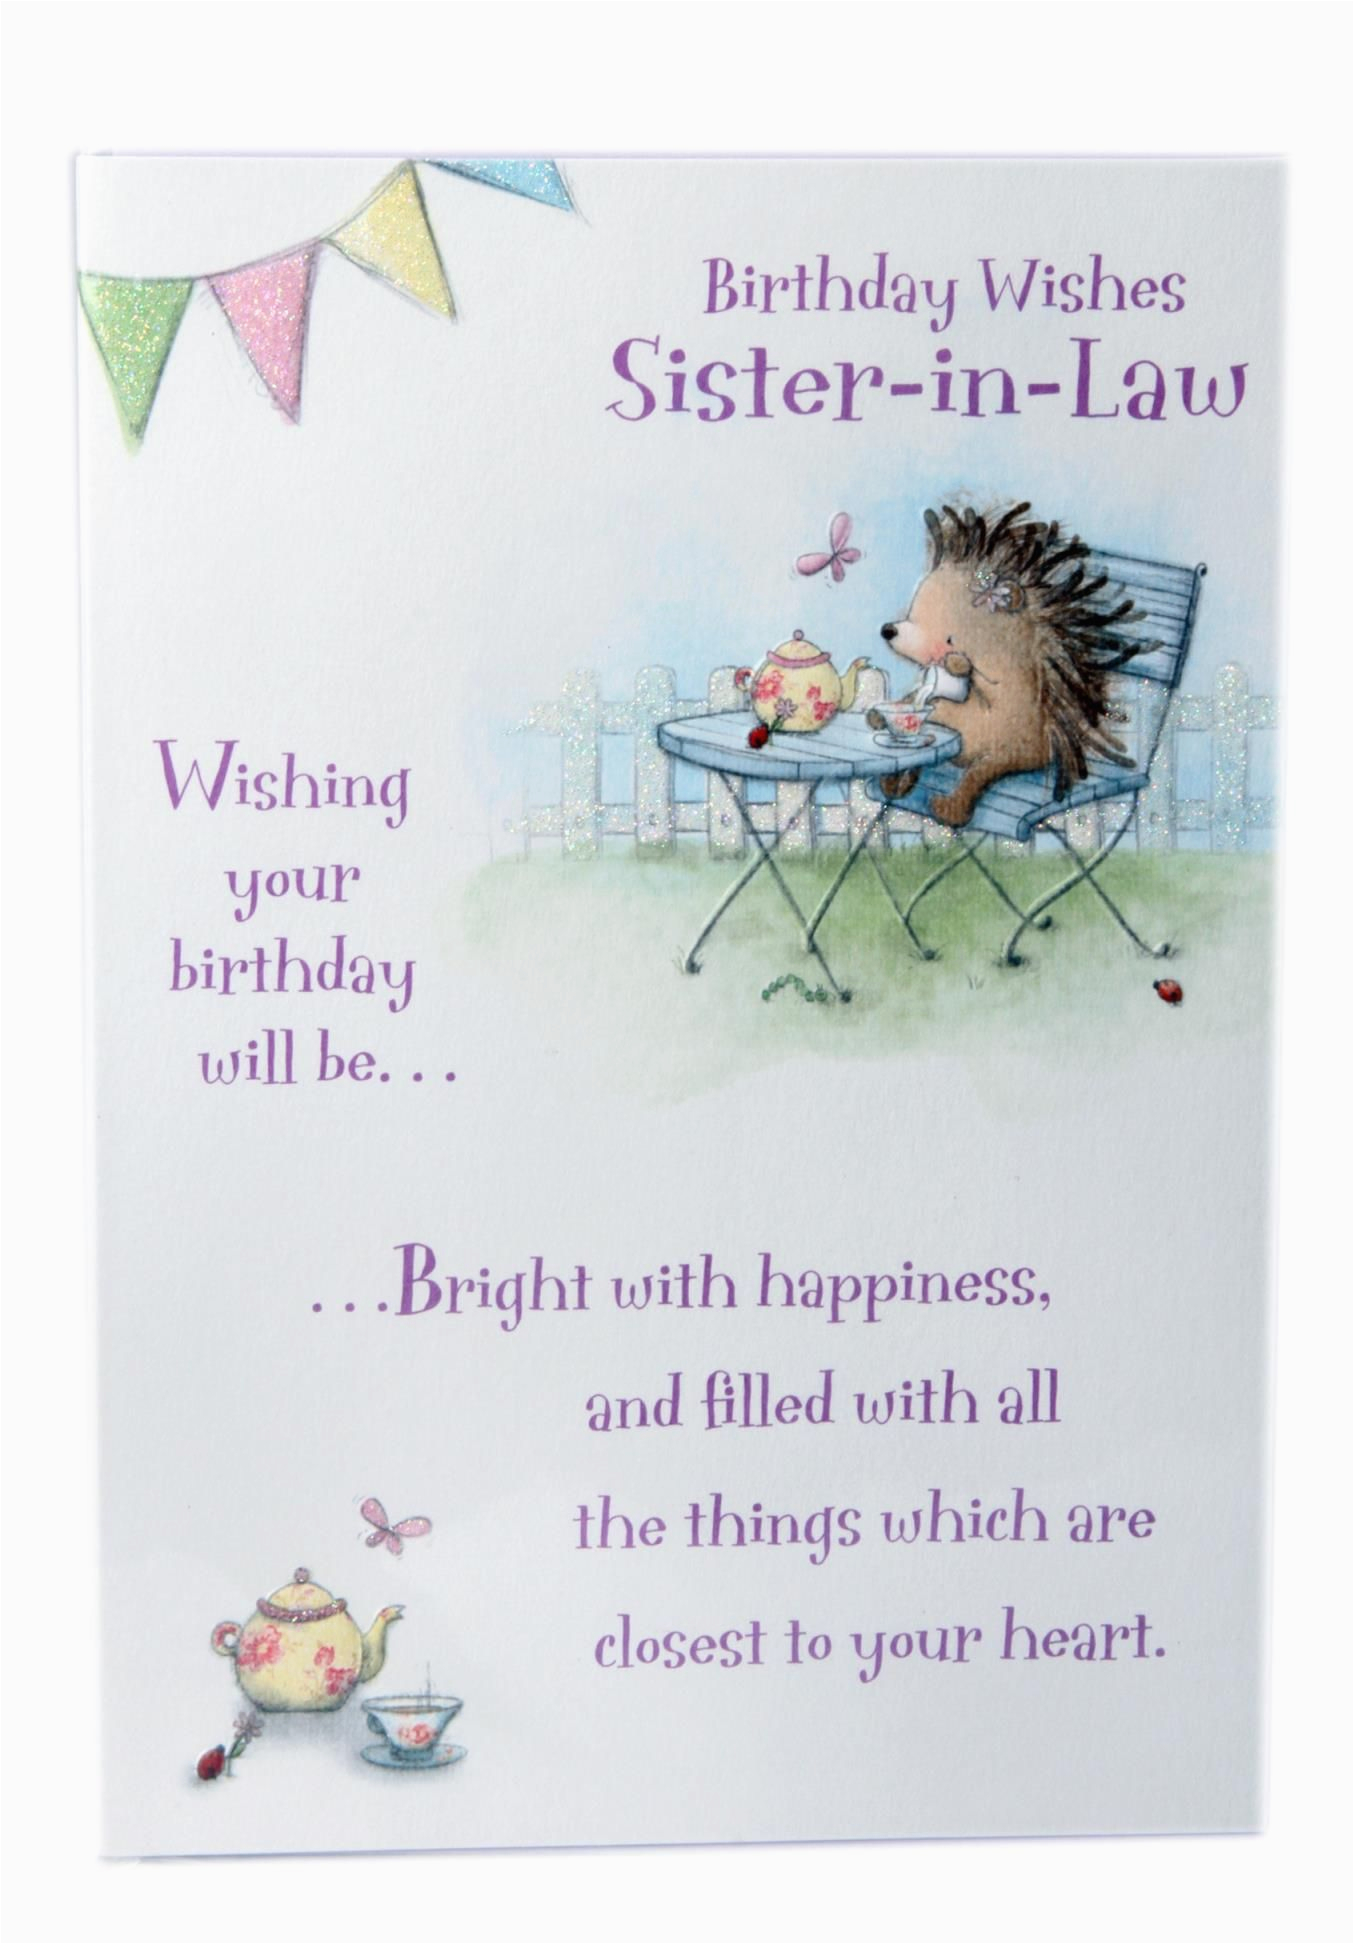 Funny Birthday Cards for Sister In Law Funny Birthday Quotes for Sister In Law Birthday